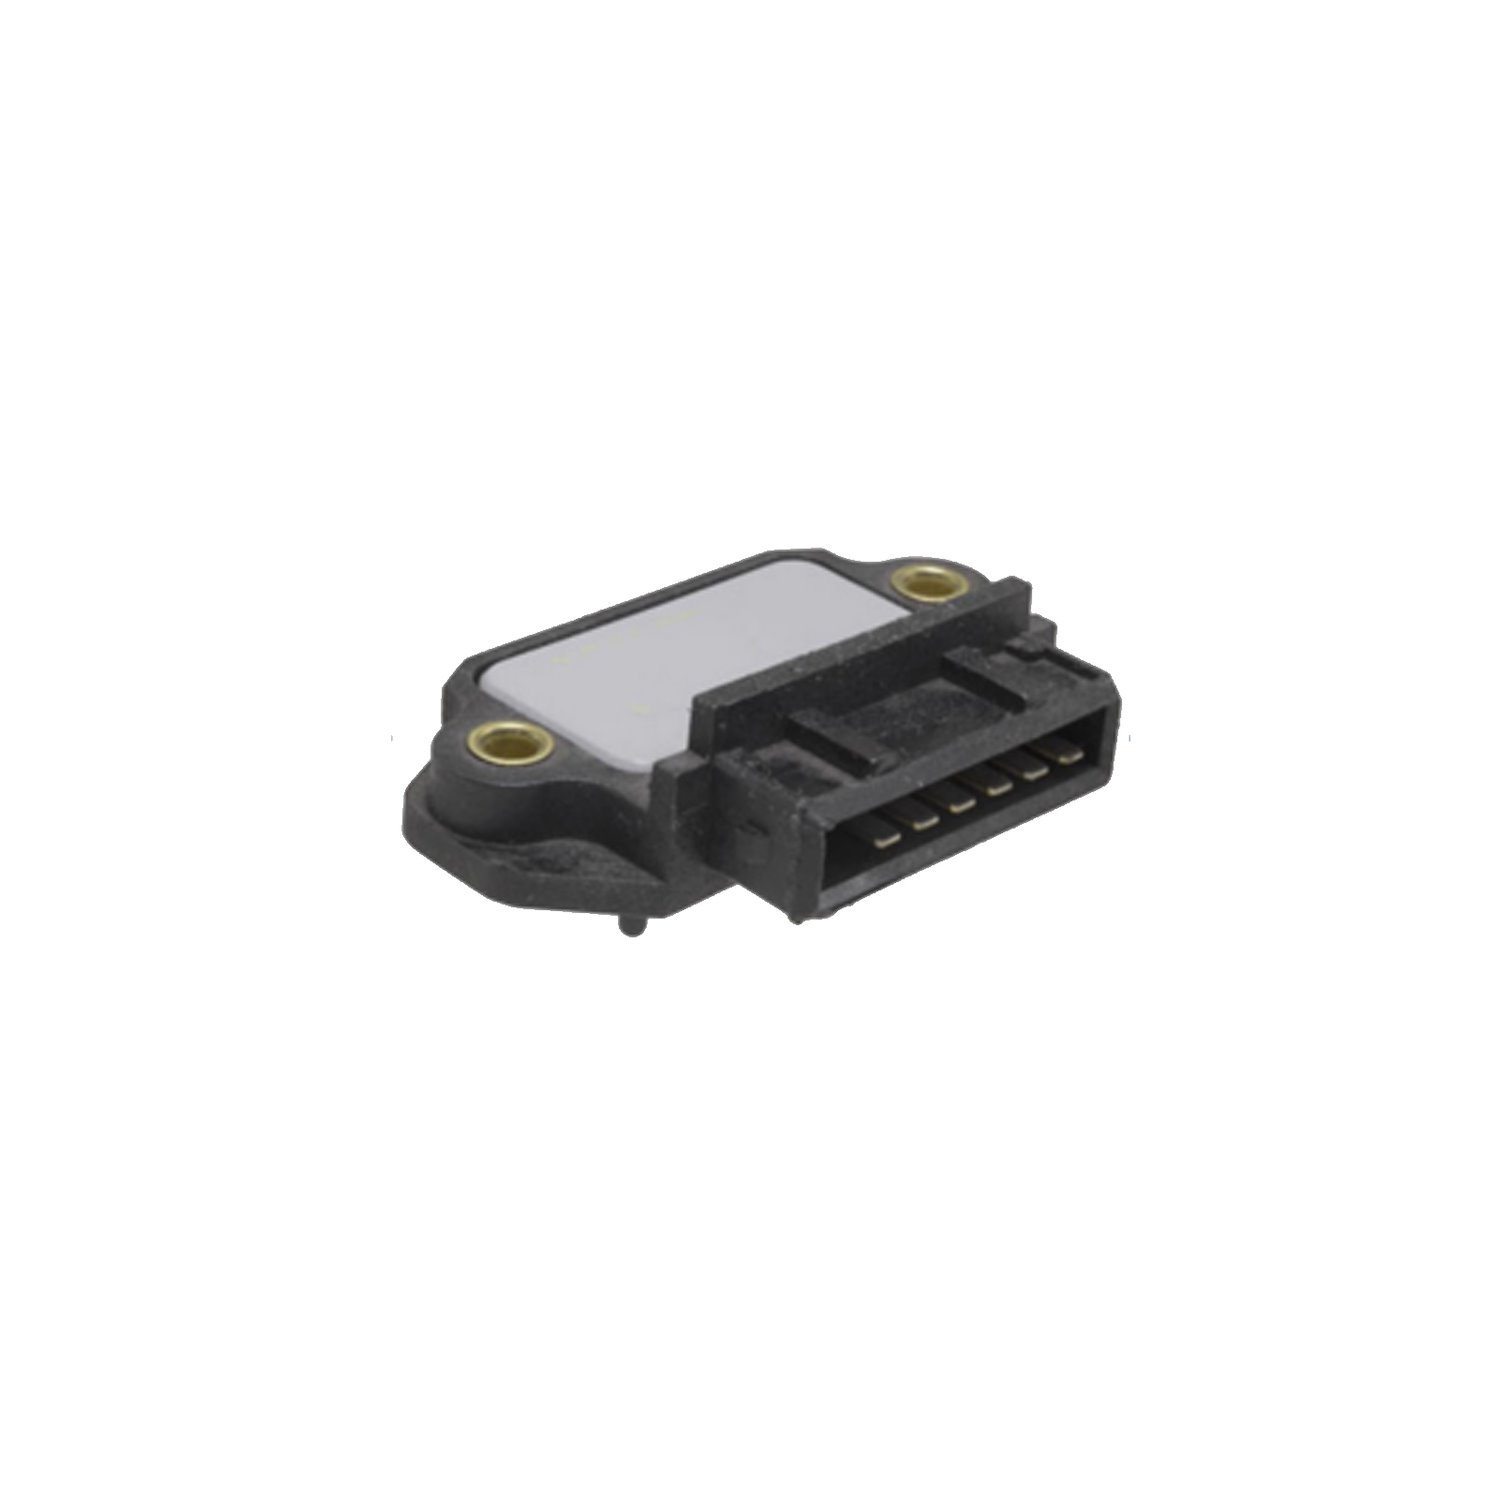 OE Replacement Ignition Control Module for Volkswagen Jetta/Golf,